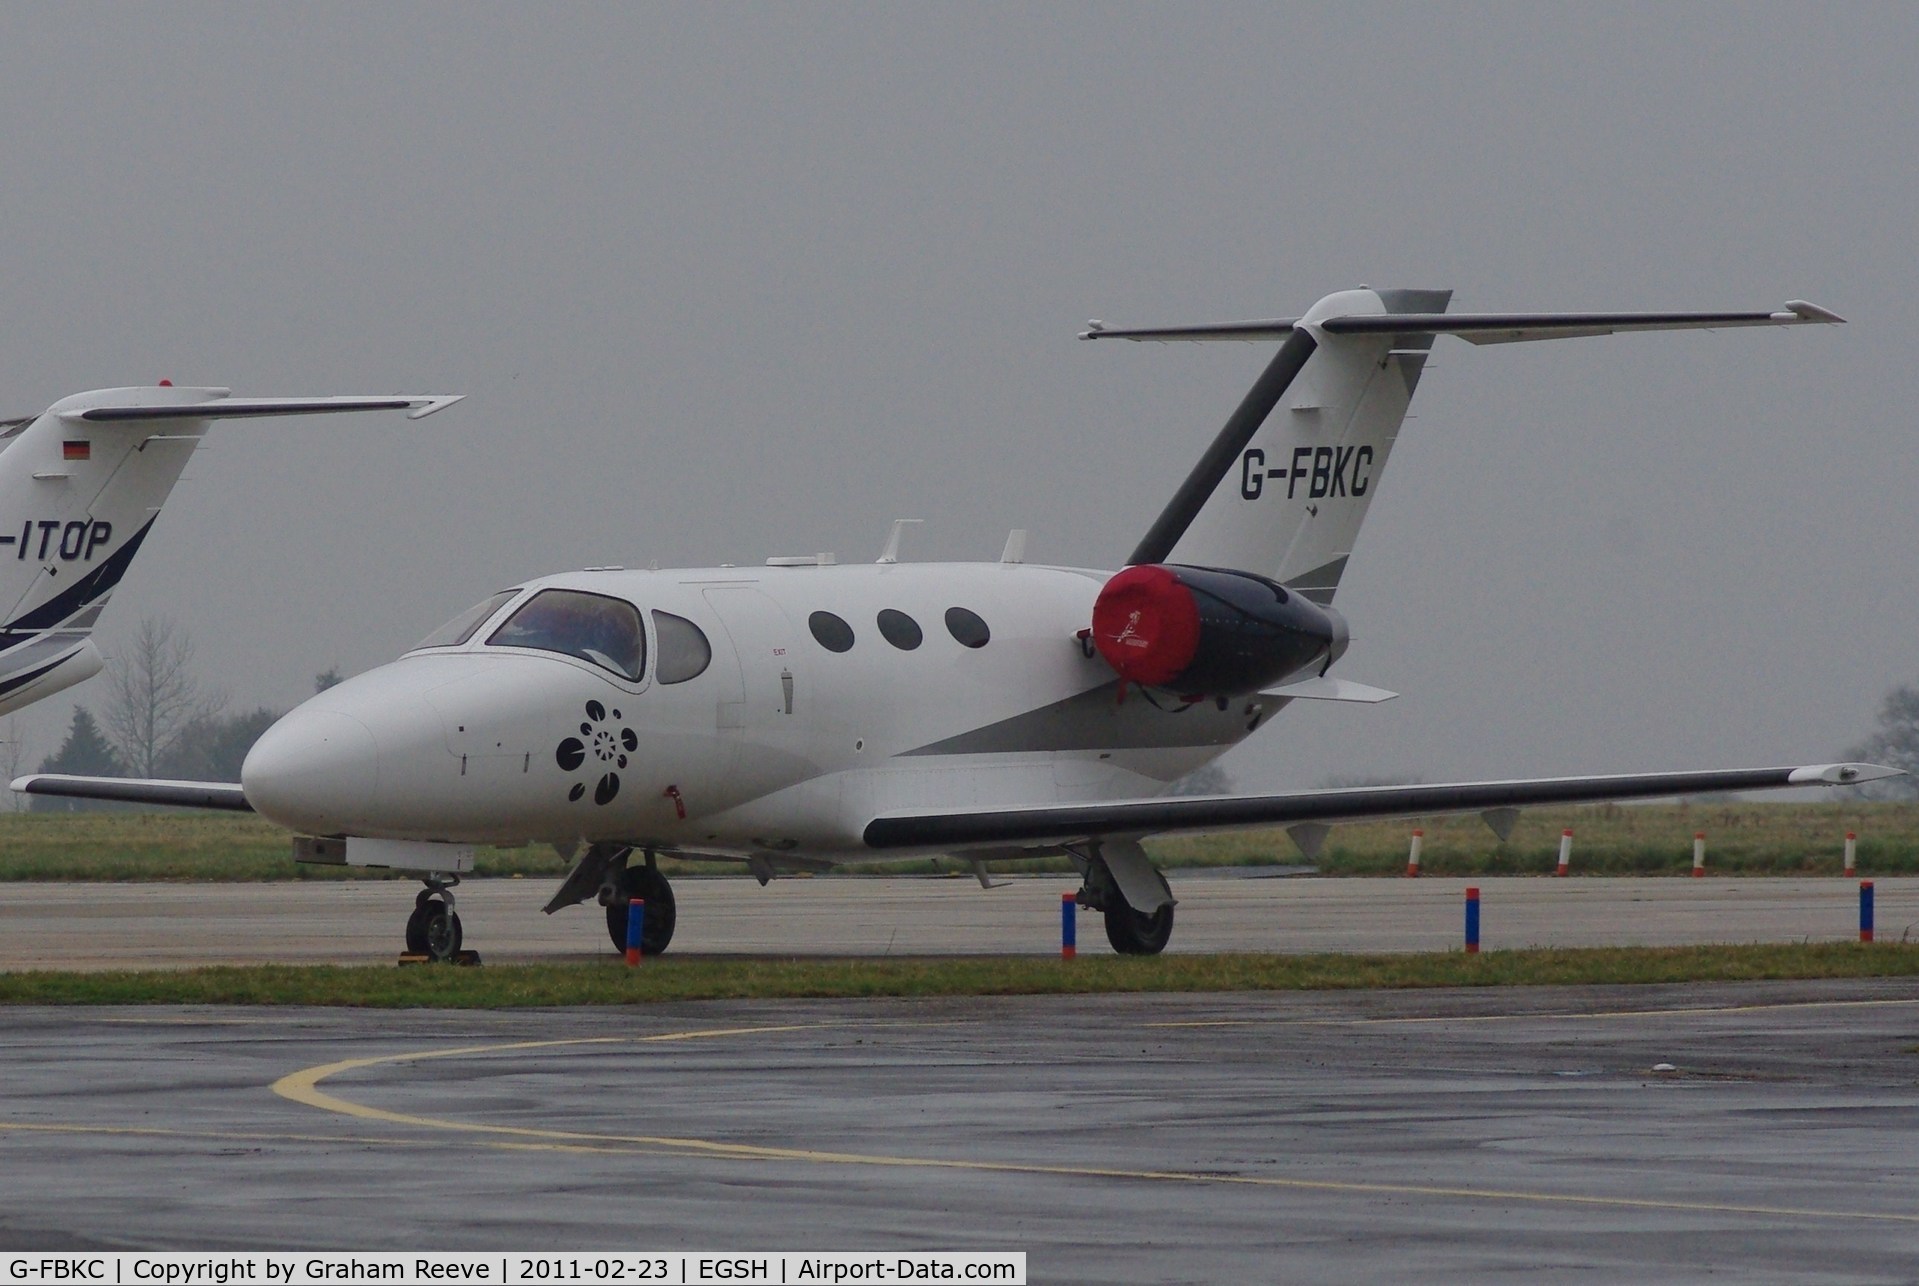 G-FBKC, 2008 Cessna 510 Citation Mustang Citation Mustang C/N 510-0127, Parked at Norwich on a wet afternoon.